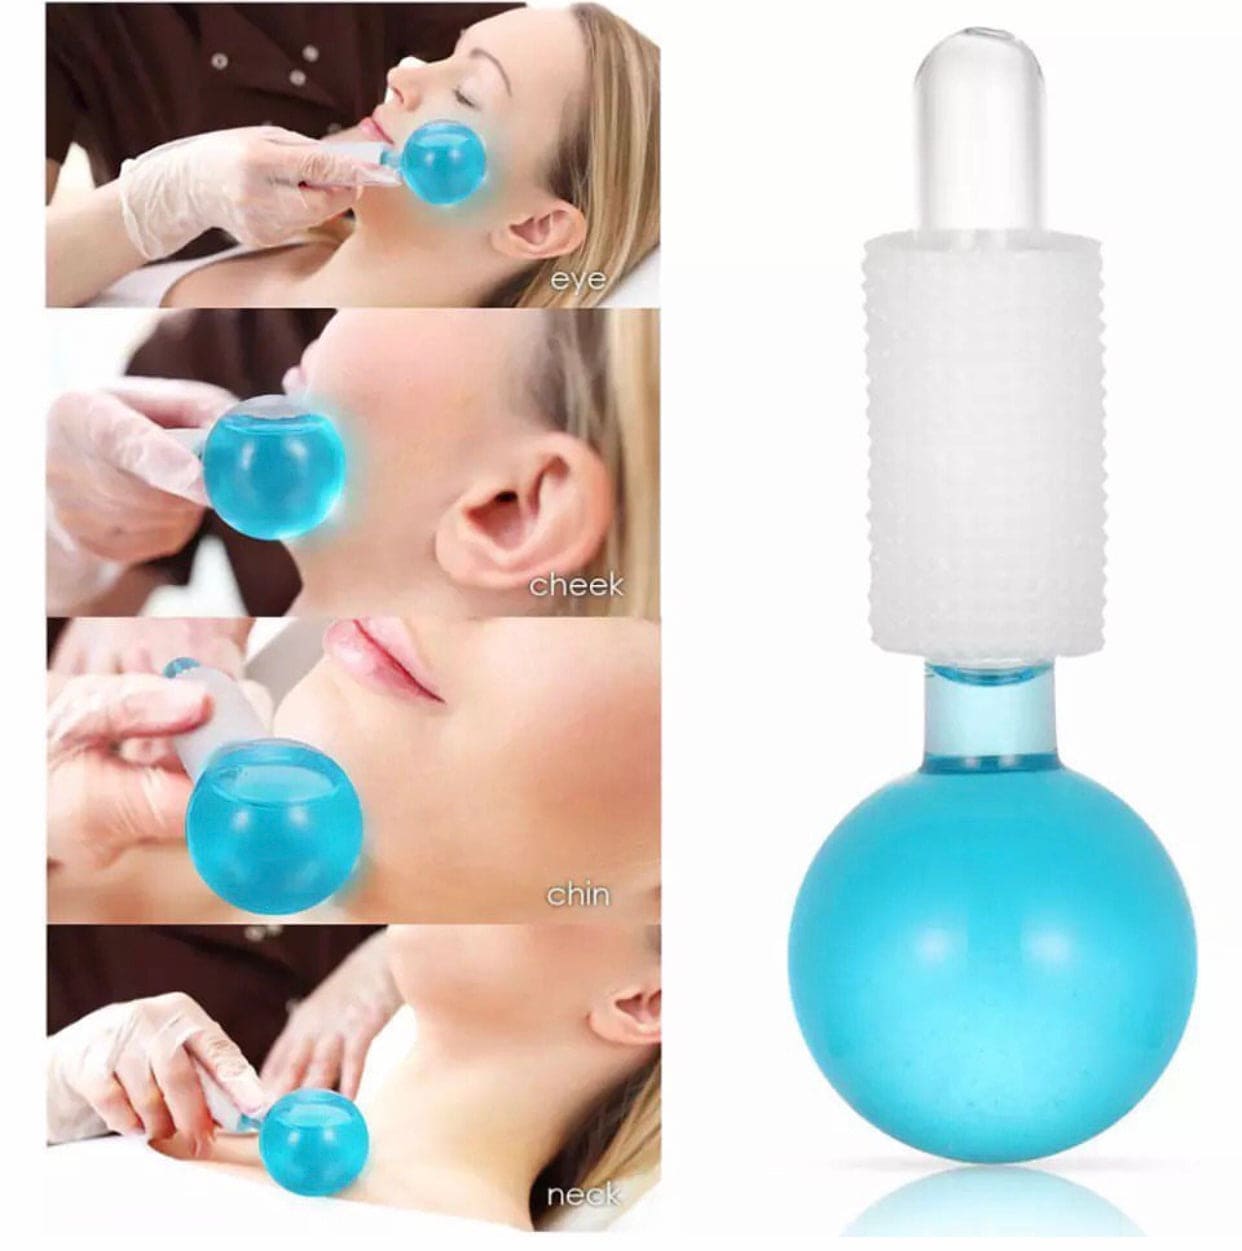 2 Pcs Crystal Ice Hockey, Energy Face Eye Massaging Globes, Face Lifting Anti Wrinkles Ice Roller, Anti Aging Health And Skincare Tool